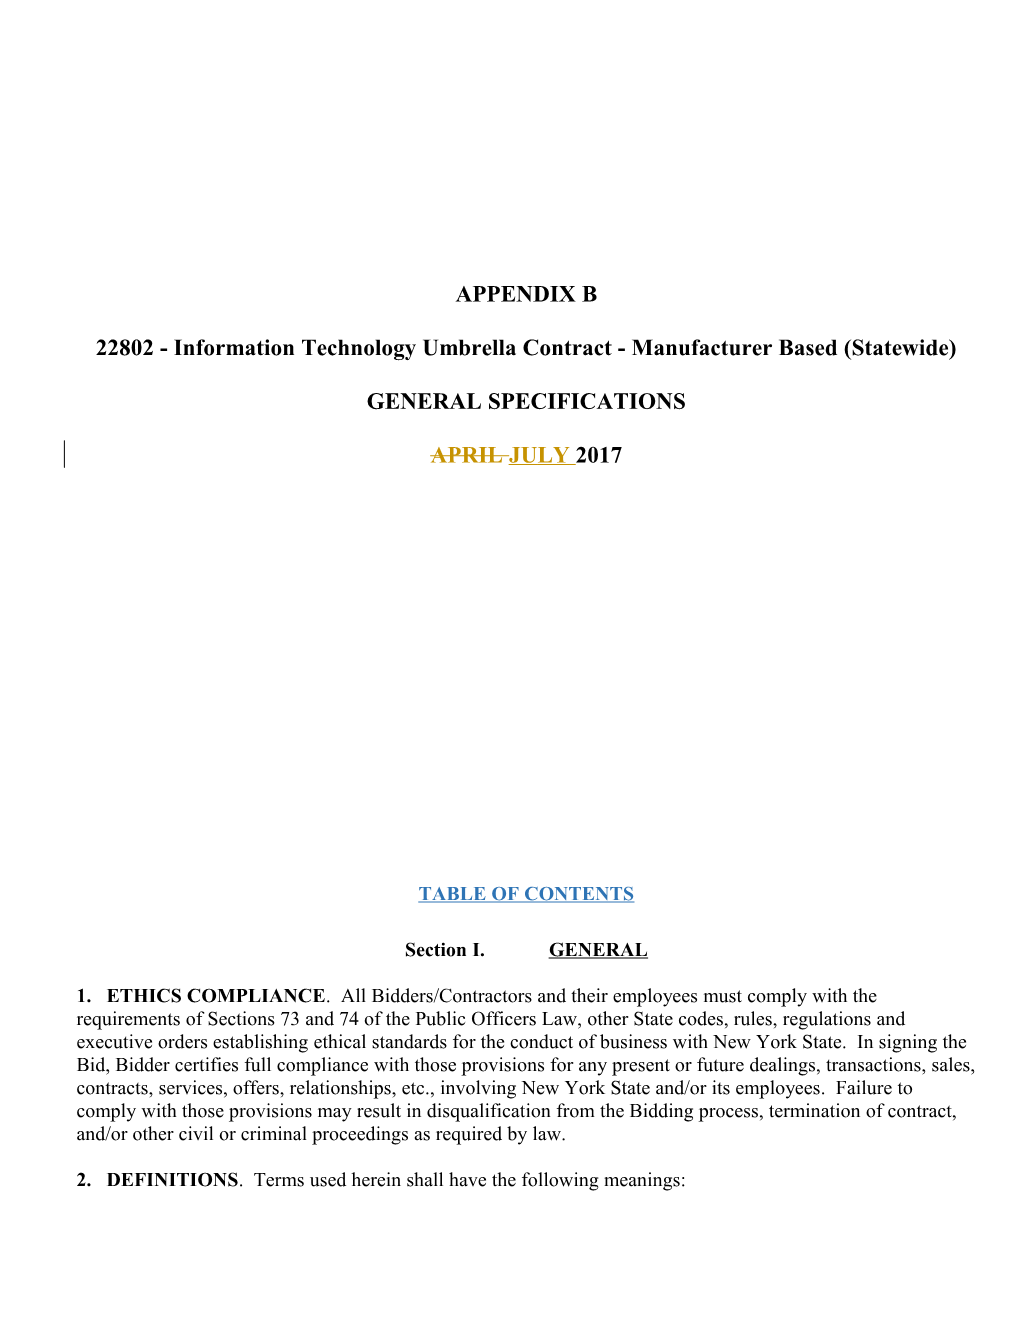 22802 - Information Technology Umbrella Contract - Manufacturer Based (Statewide)